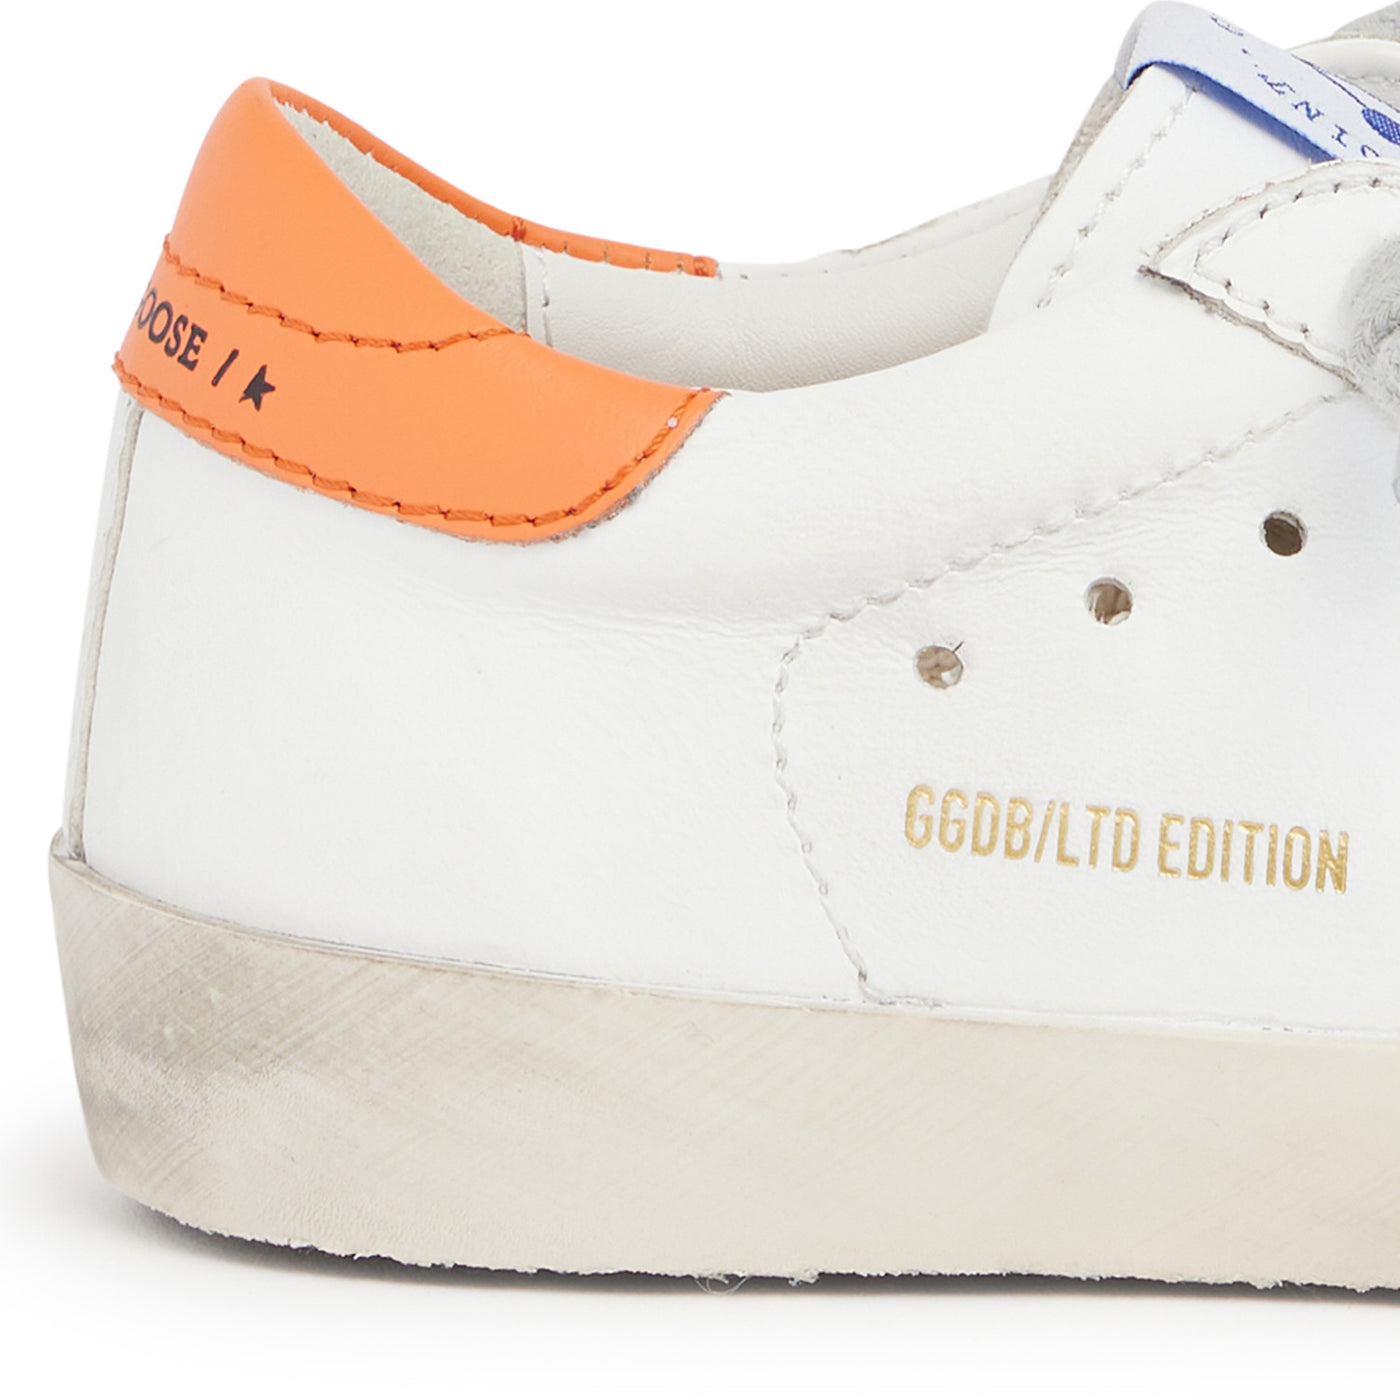 Bonpoint x Golden Goose Leather Sneakers blue